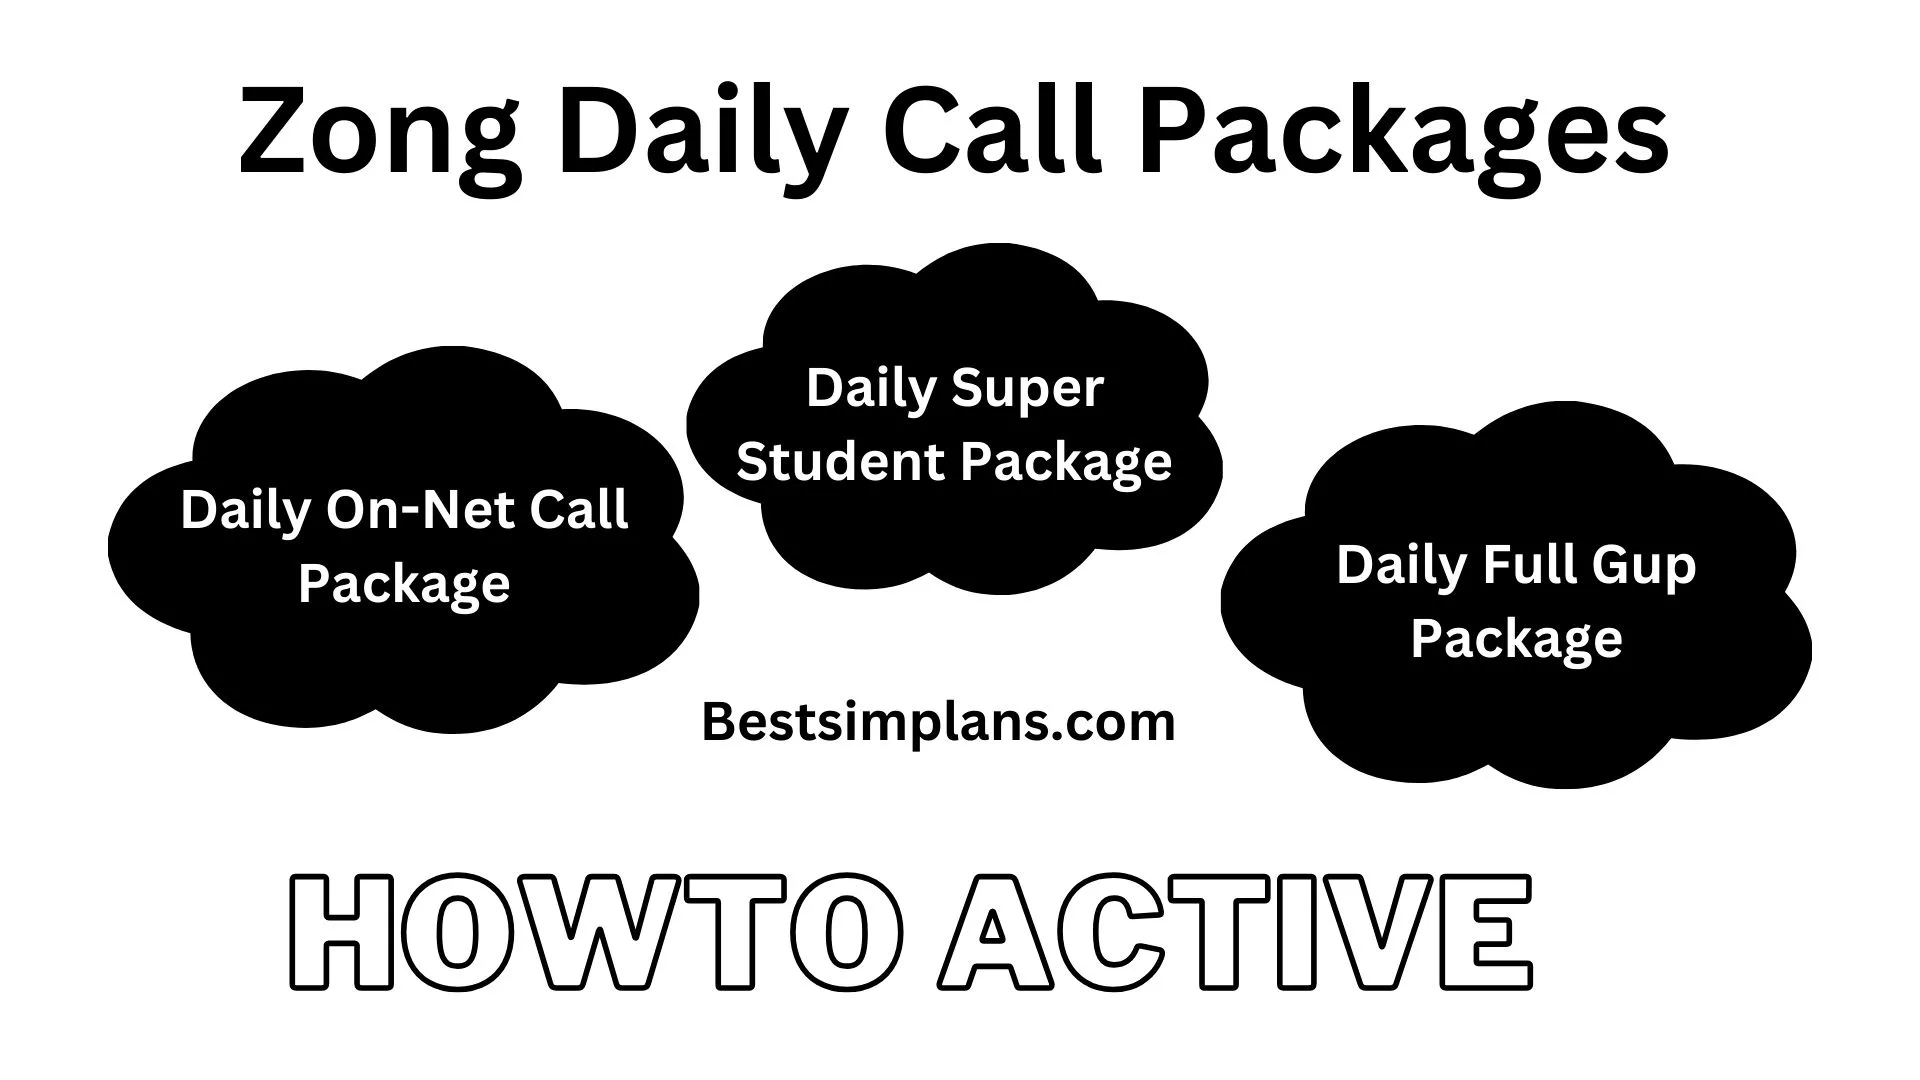 Zong Daily Call Packages 24 Hours